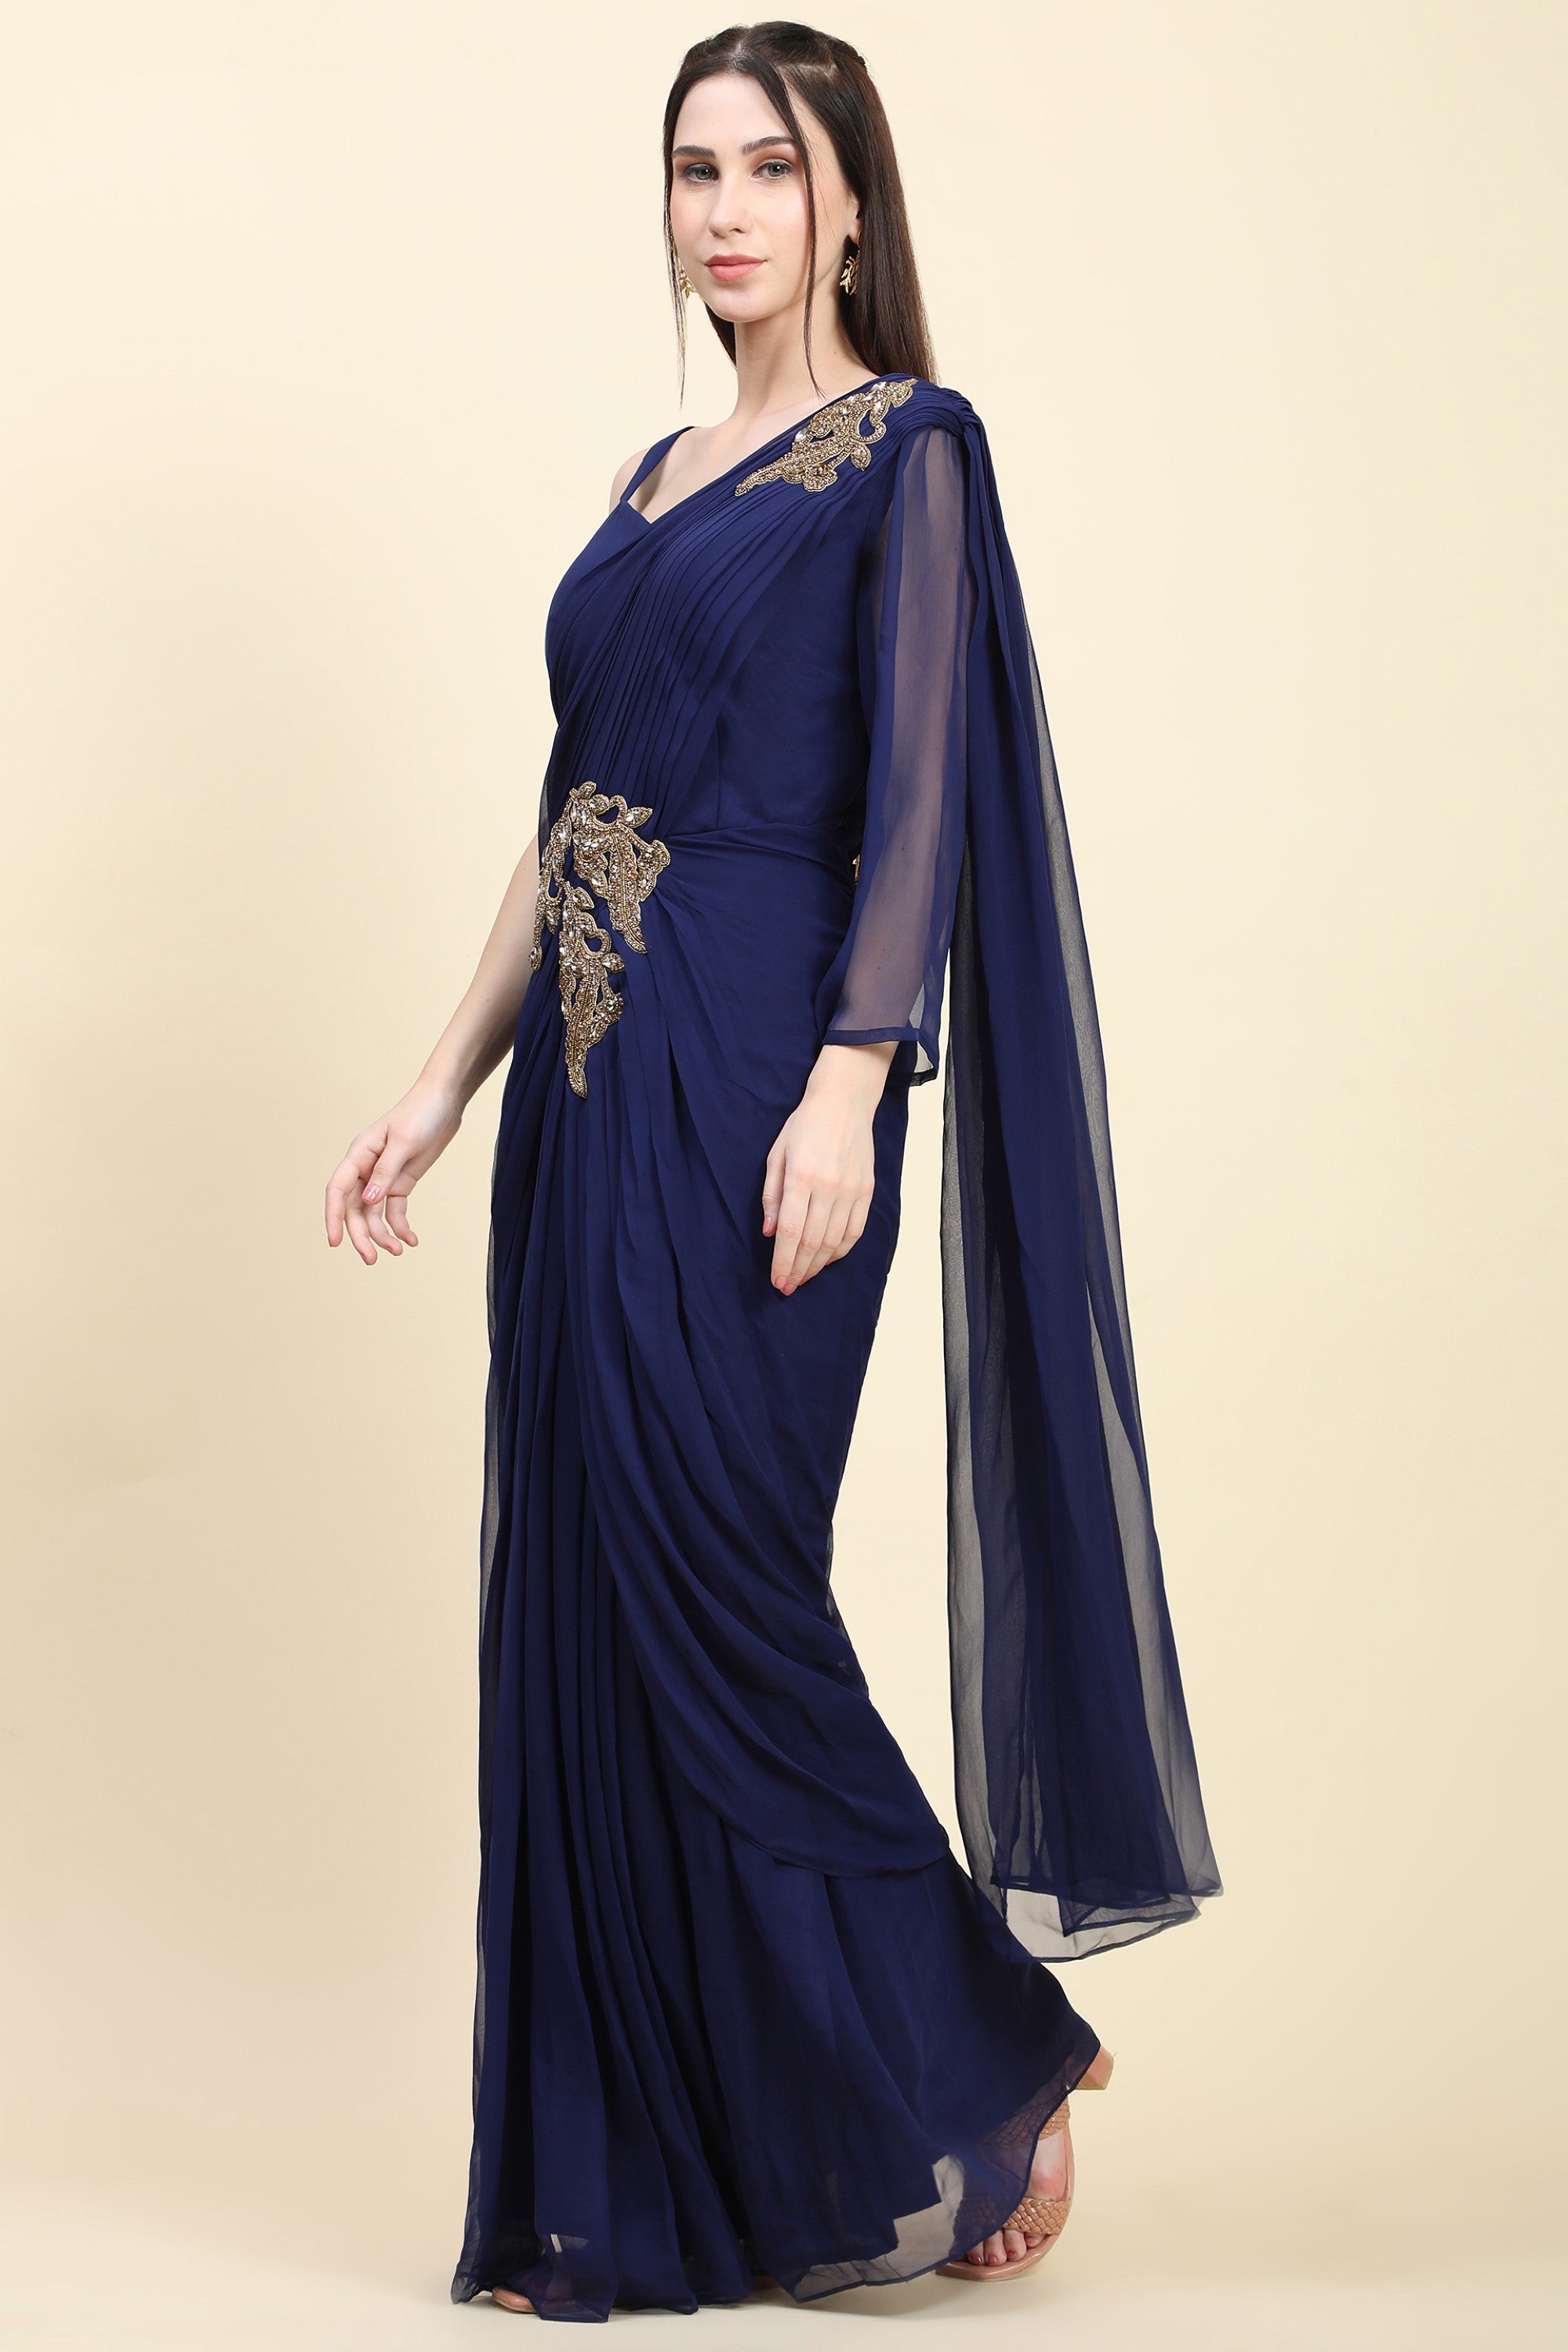 Women's Dark Blue Georgette Pleats Drape Saree, Blouse set with embroidered patches - MIRACOLOS by Ruchi